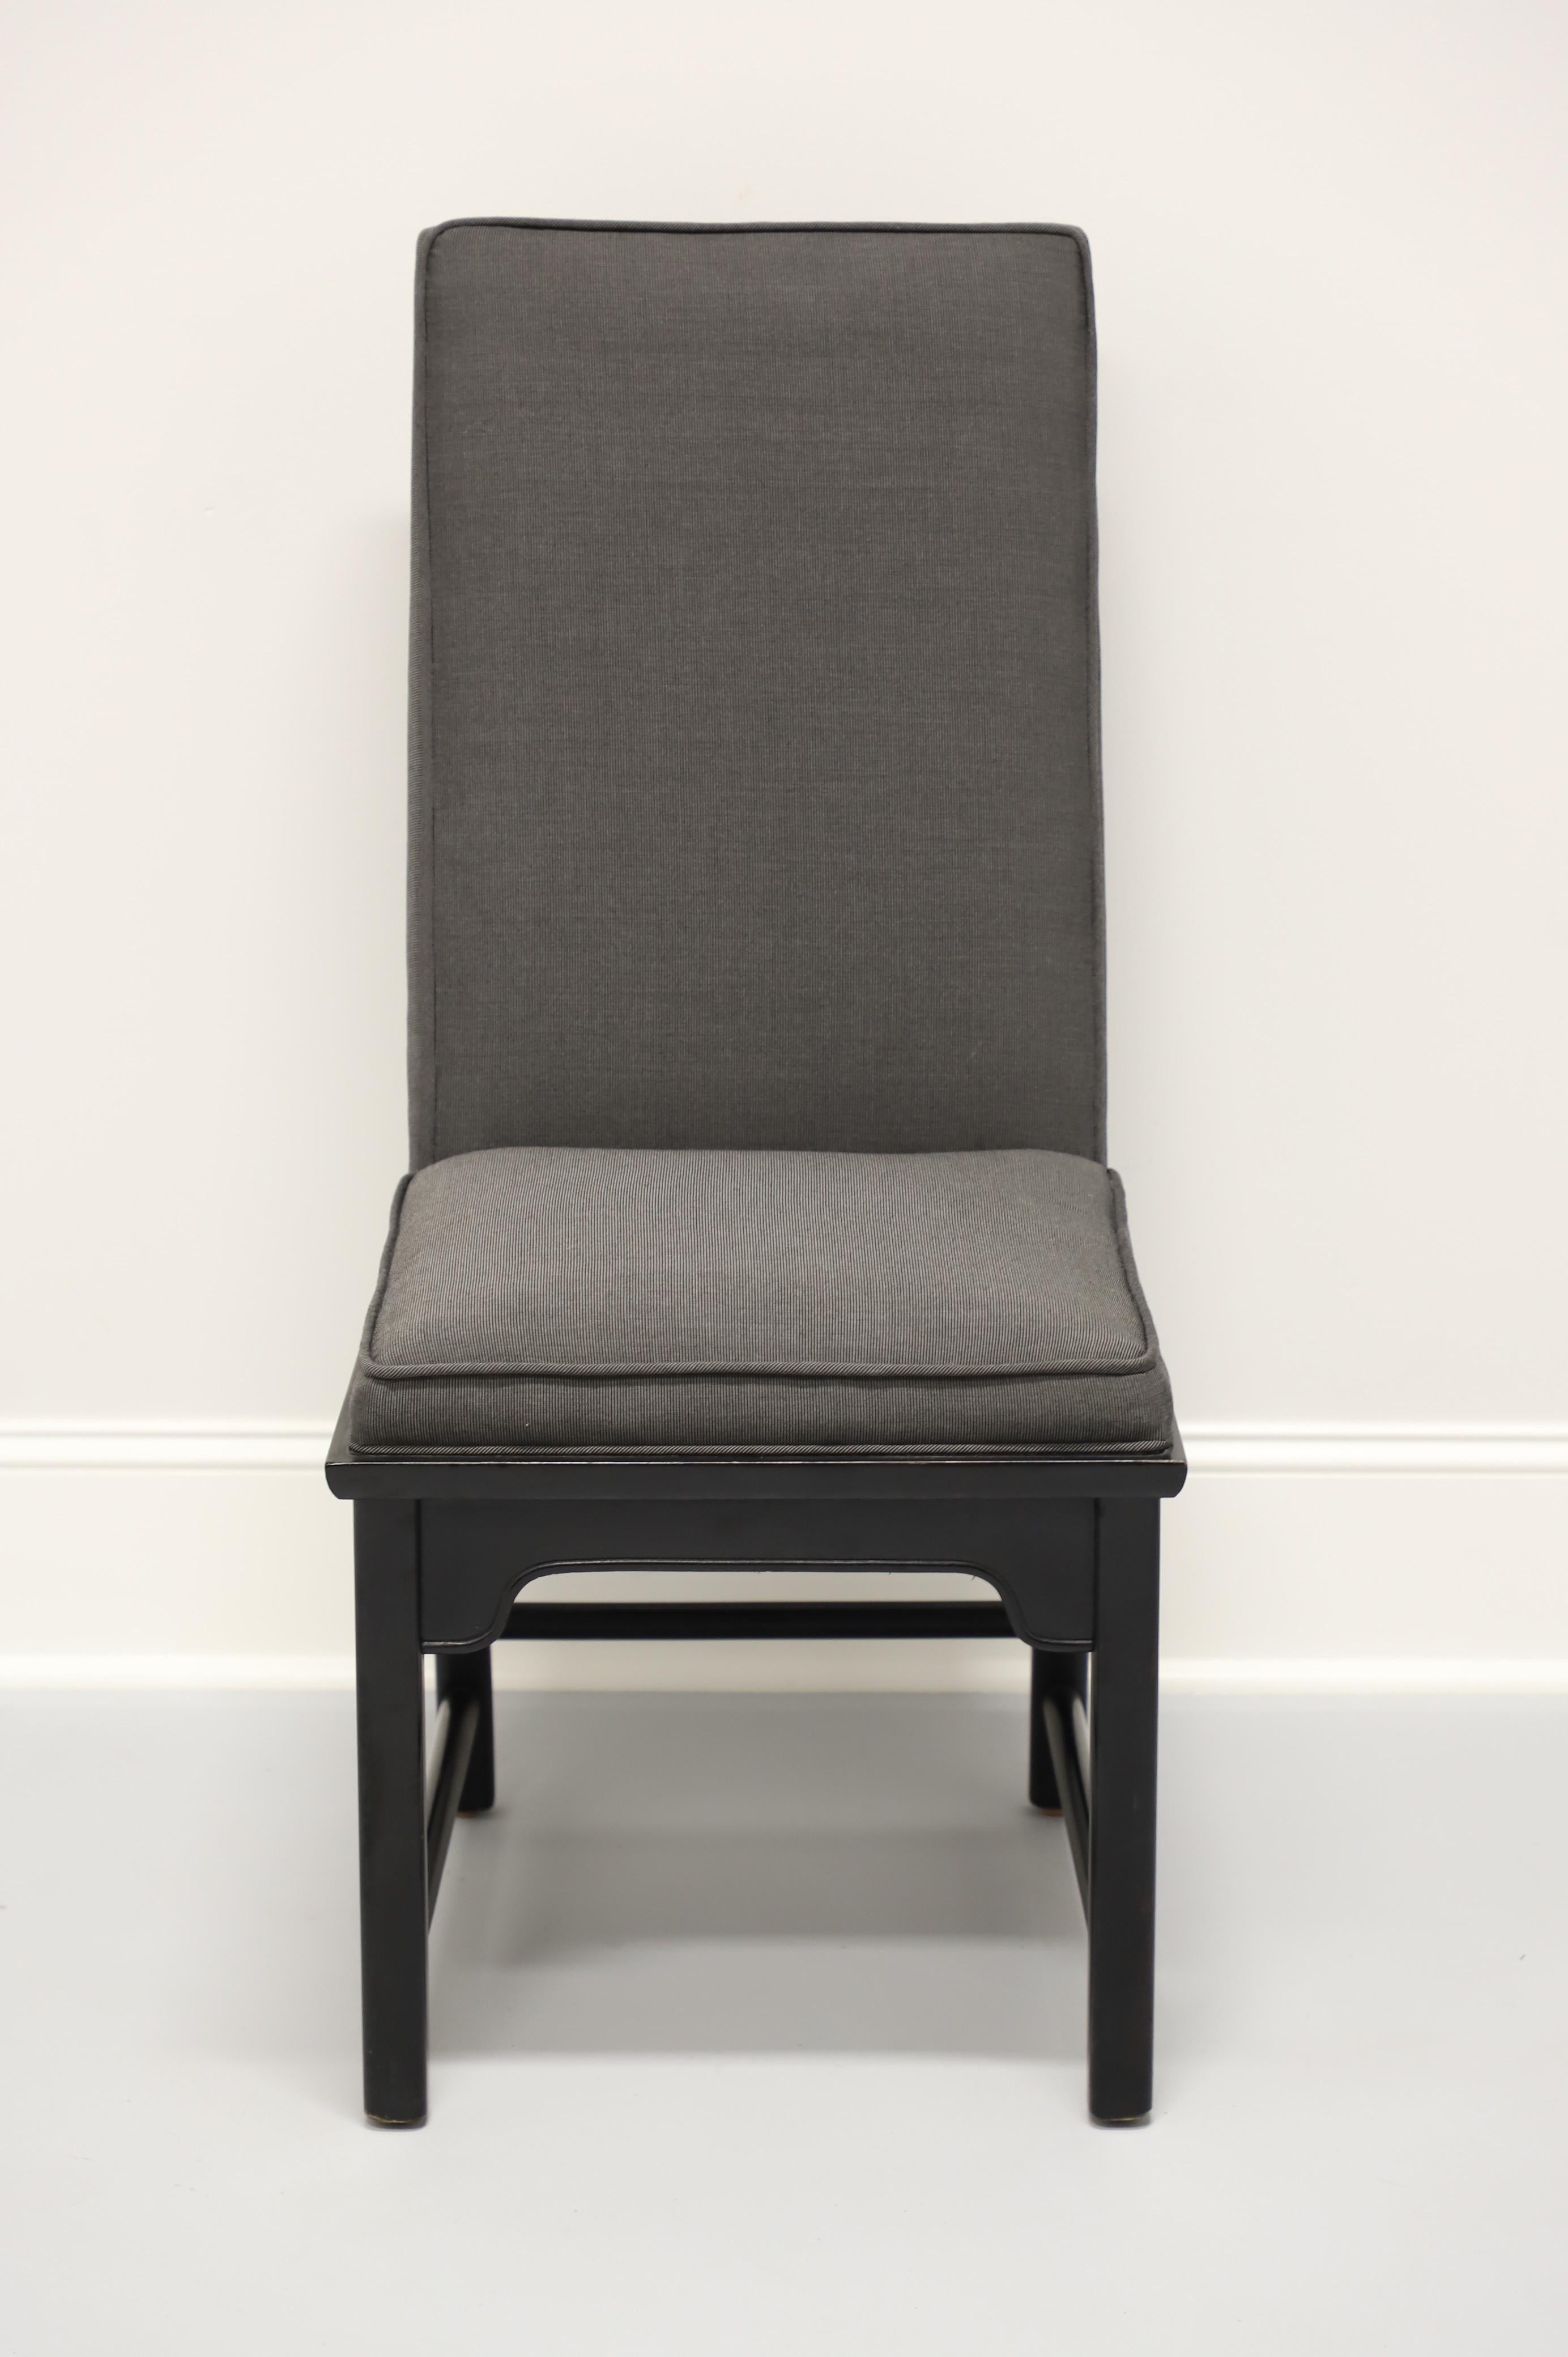 An Asian style side chair by high-quality furniture maker century. From their 